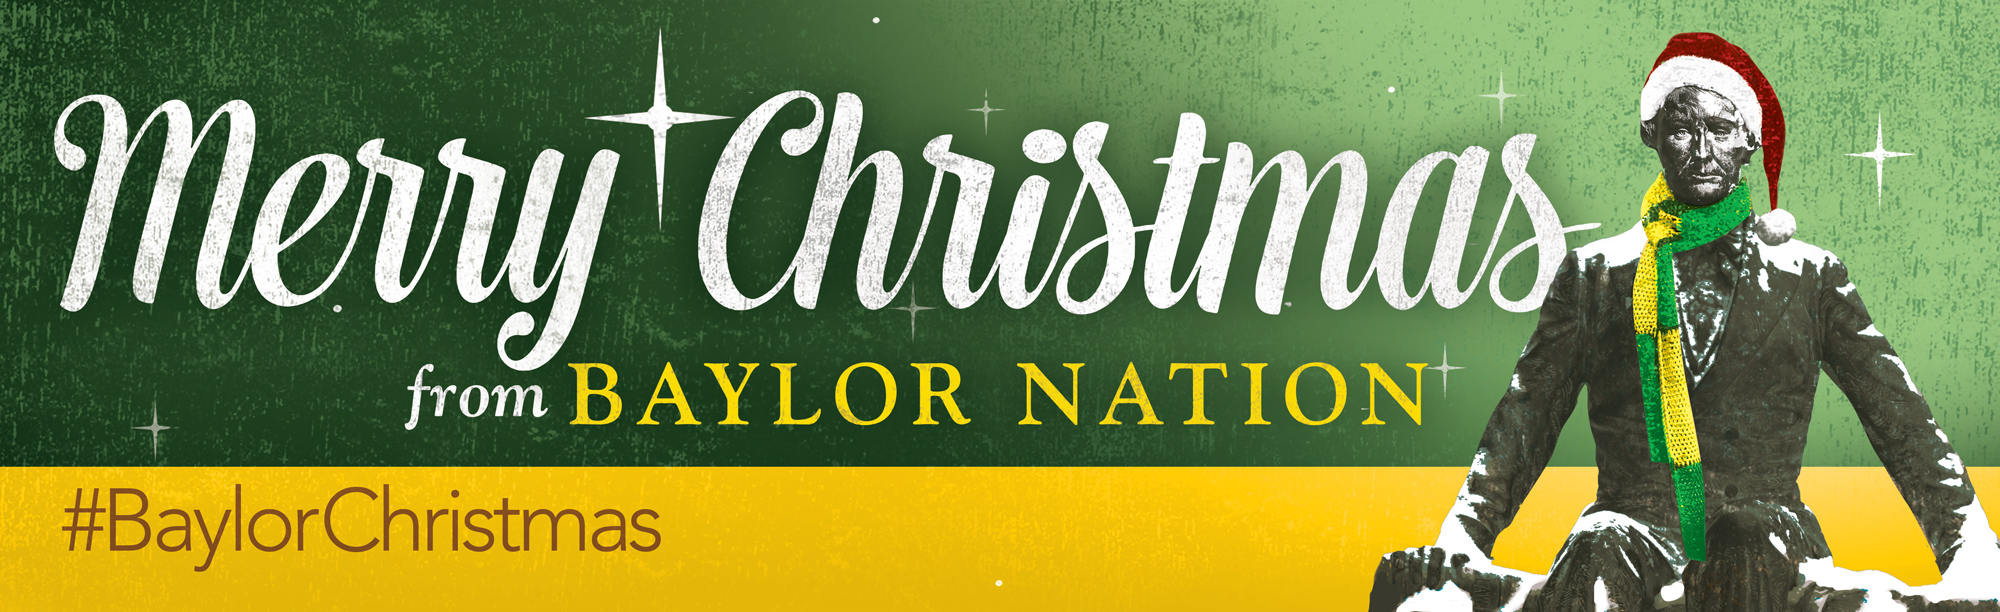 Merry Christmas from Baylor Nation